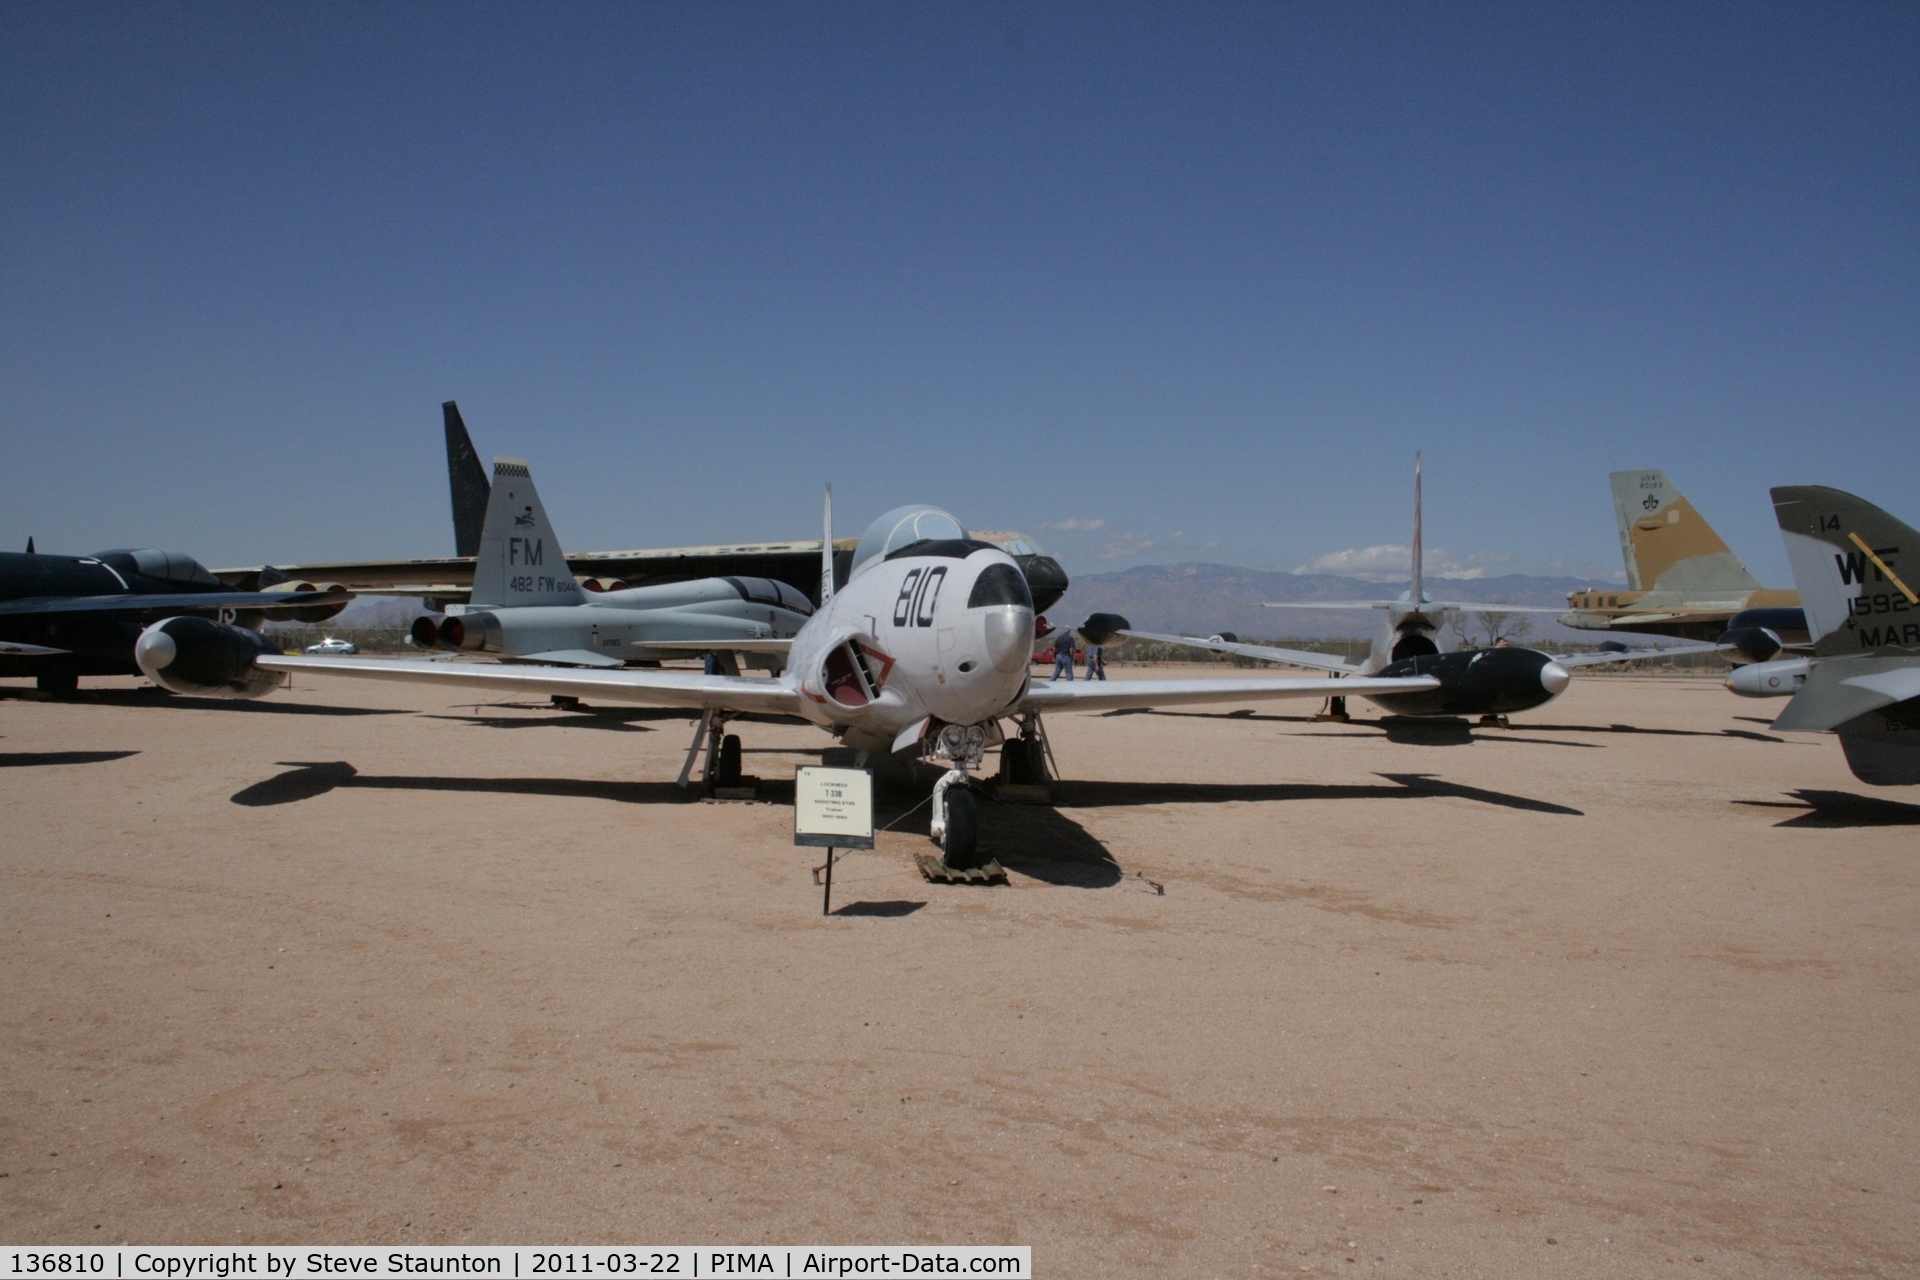 136810, Lockheed T-33B (TV-2 Seastar) C/N 580-7914, Taken at Pima Air and Space Museum, in March 2011 whilst on an Aeroprint Aviation tour